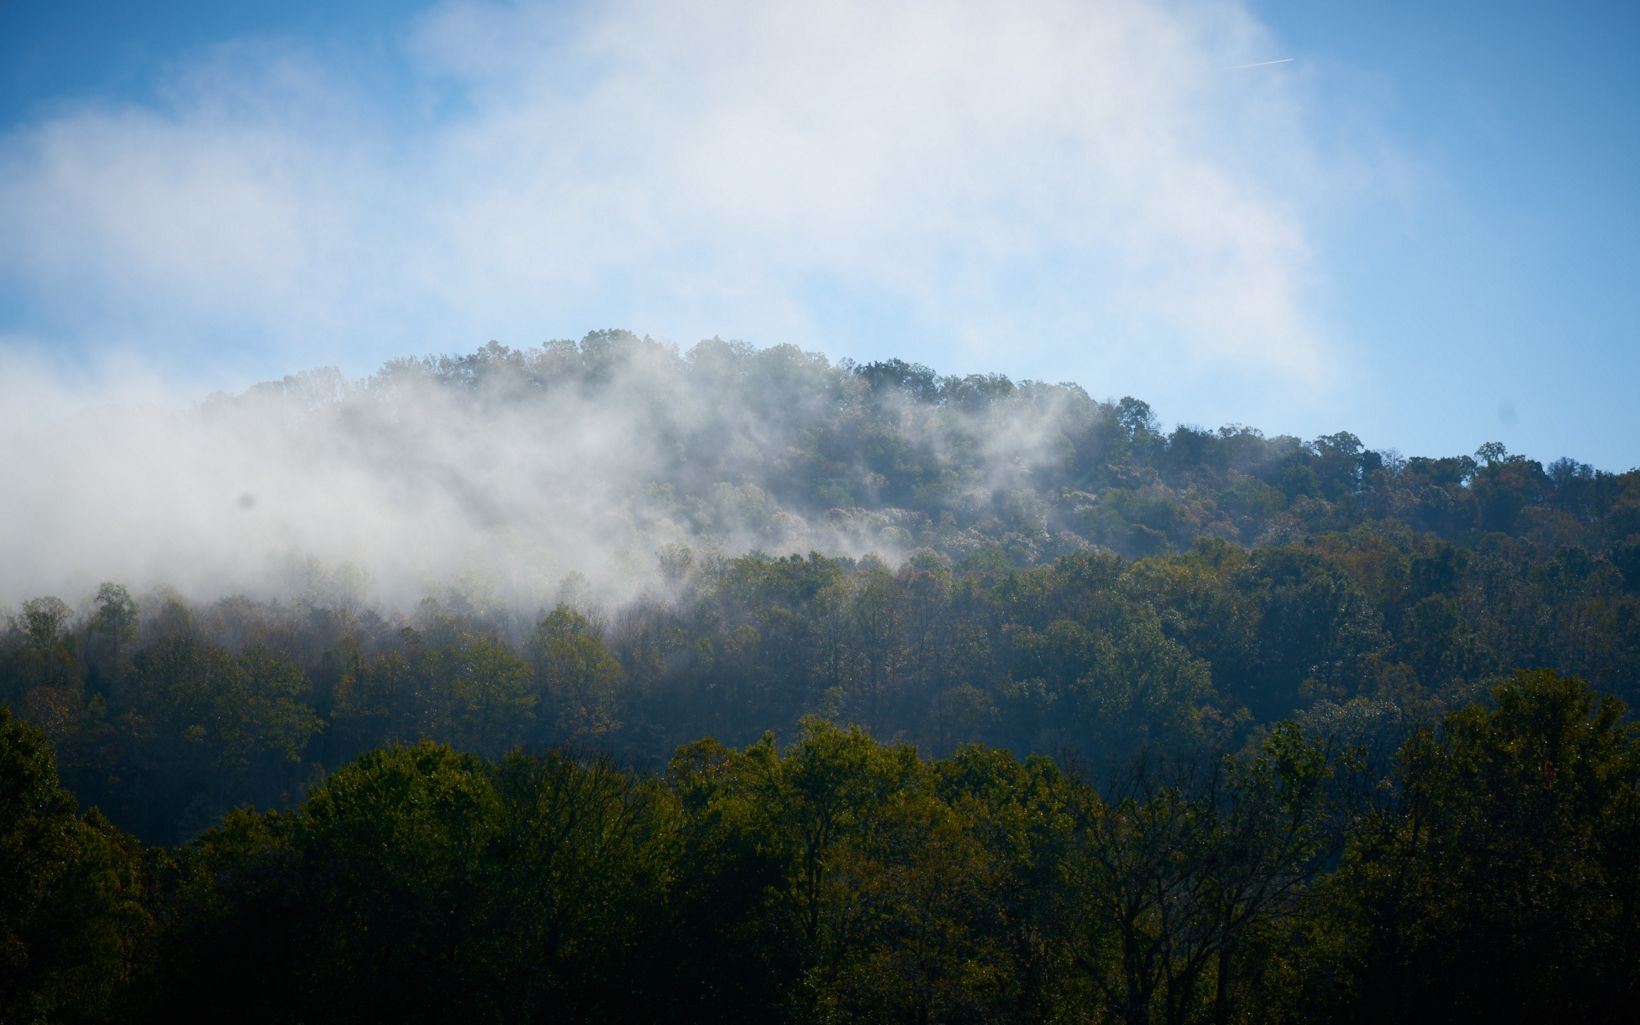 Mist over tree-covered hills.